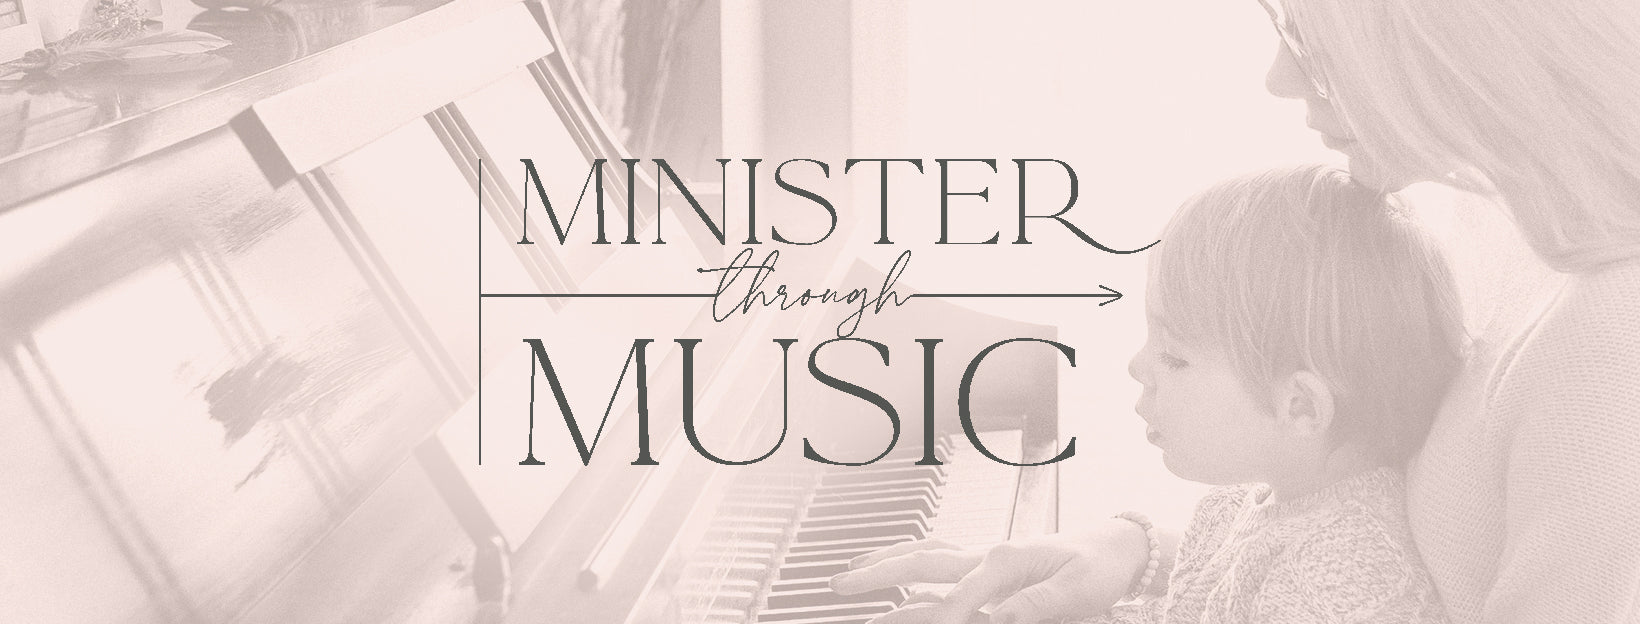 MINISTER THROUGH MUSIC Primary - Episode 1 "Do Unto Others"